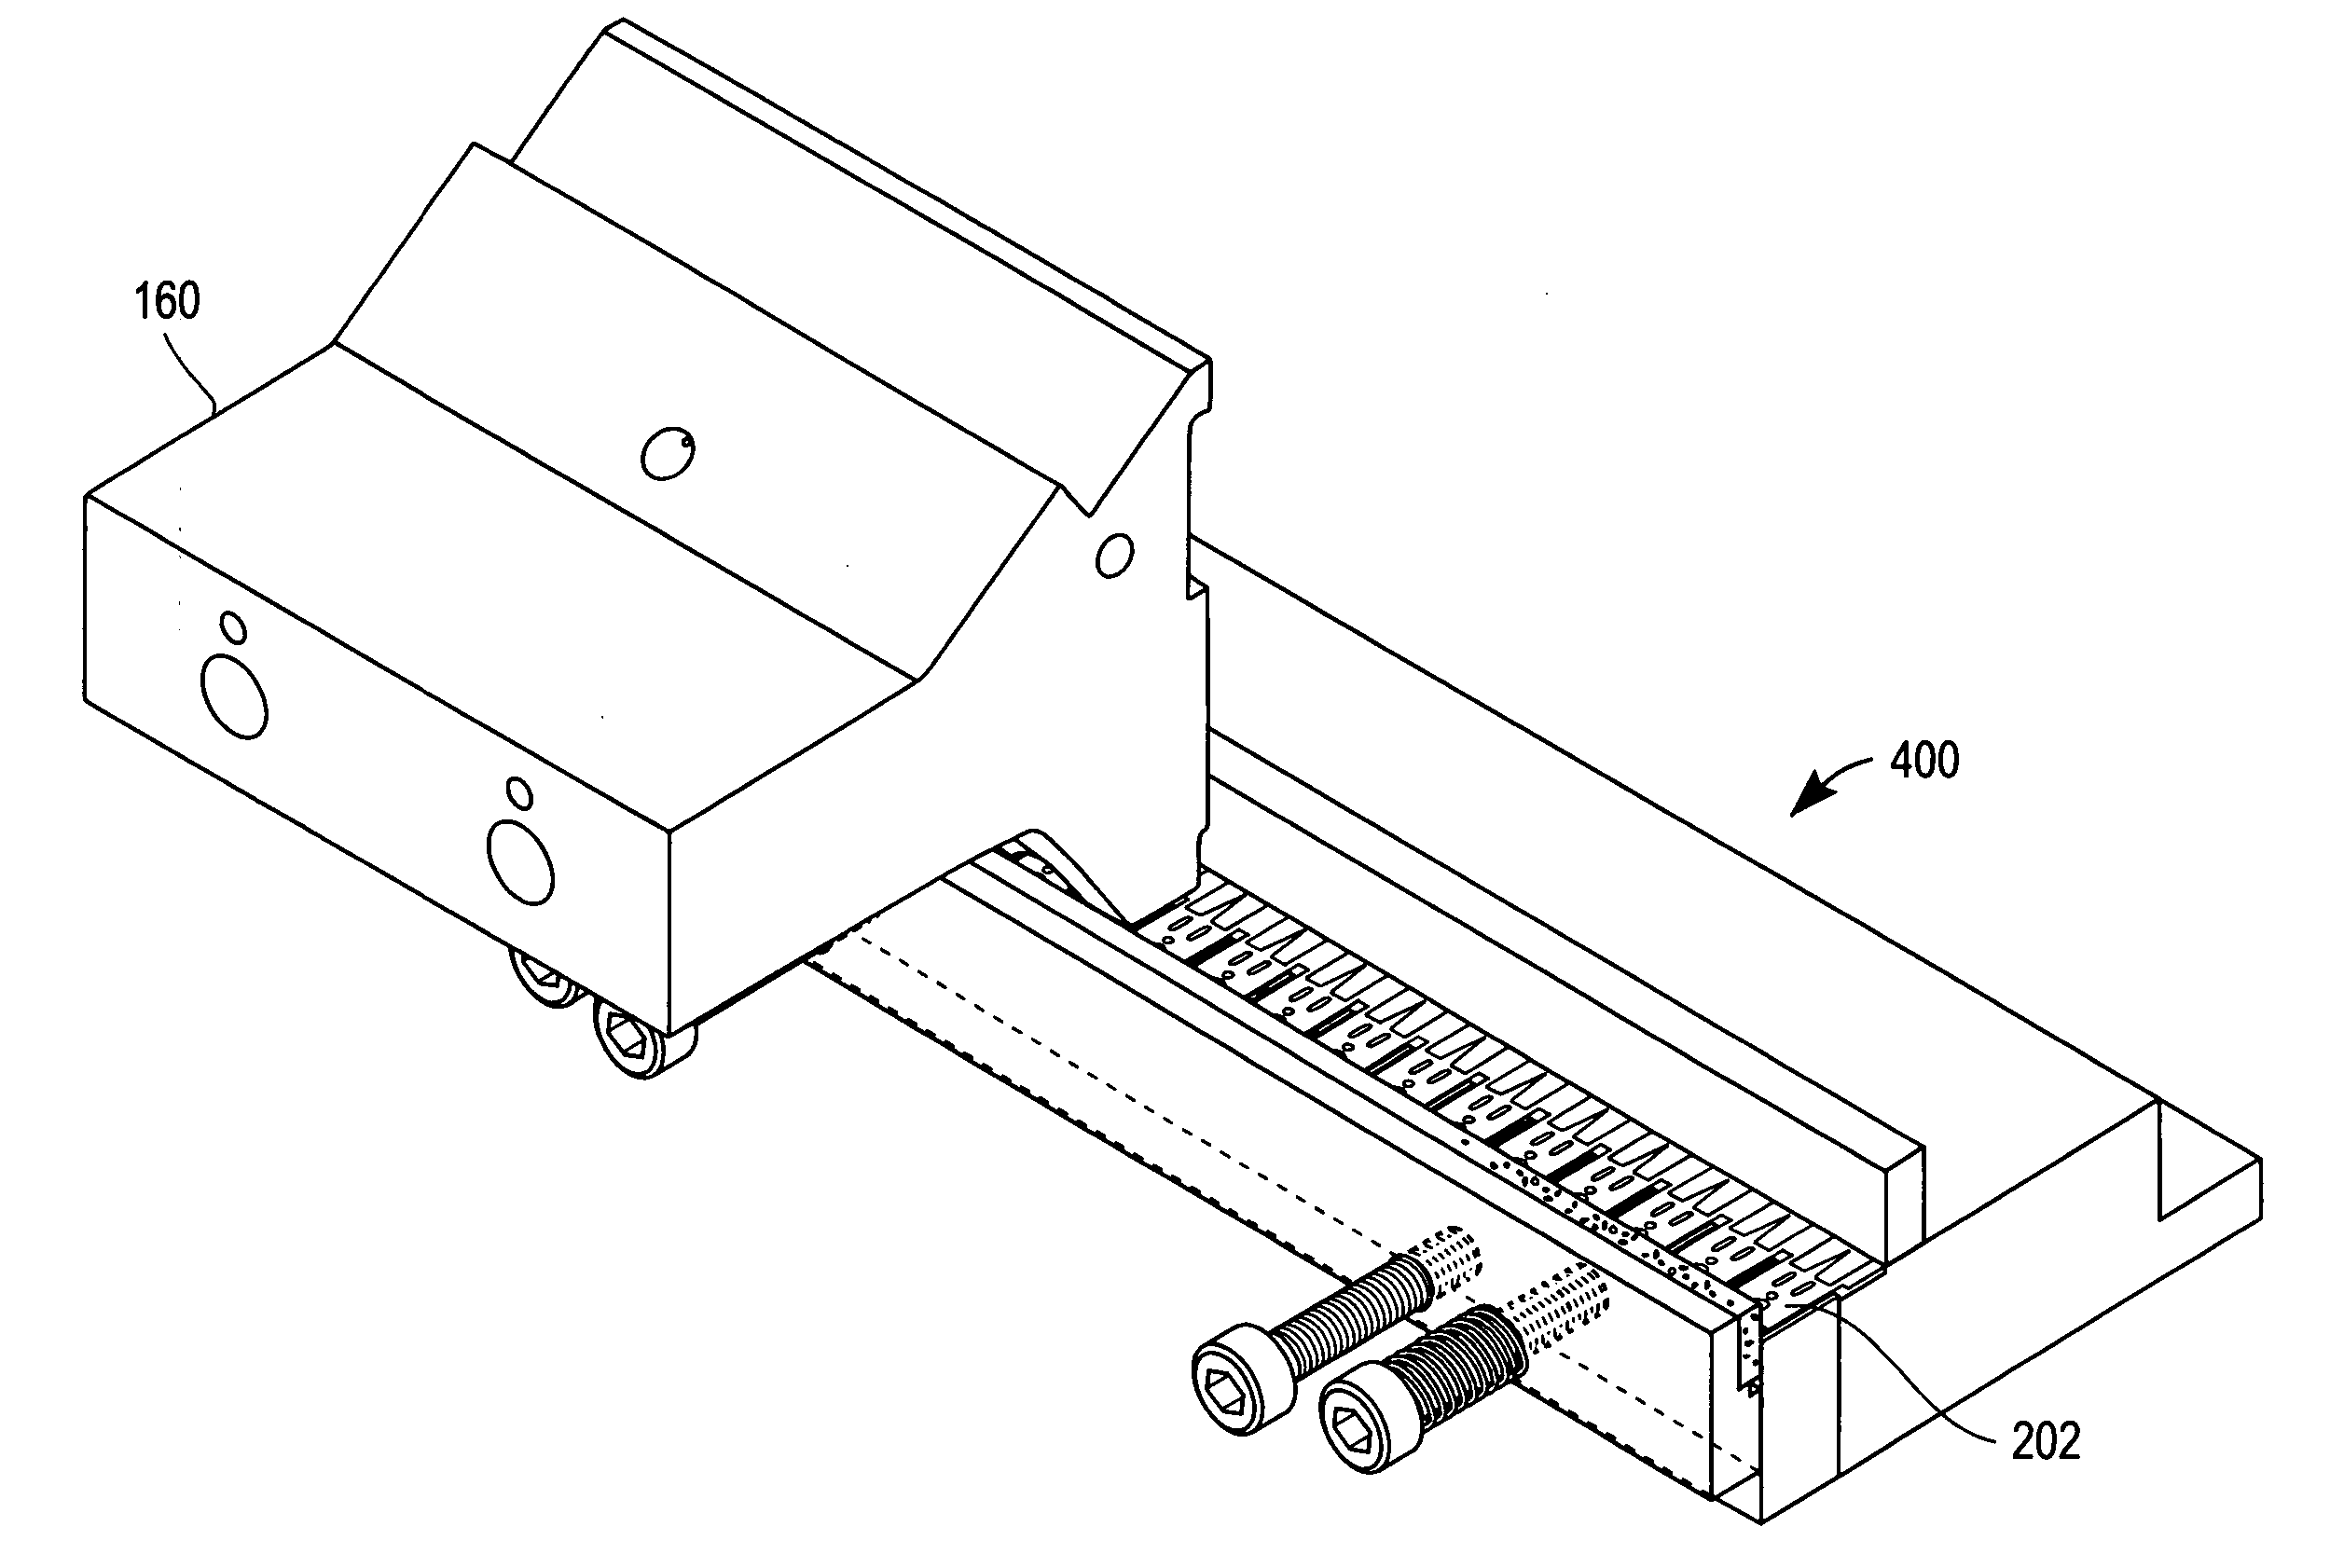 Apparatus for the manufacture of medical devices